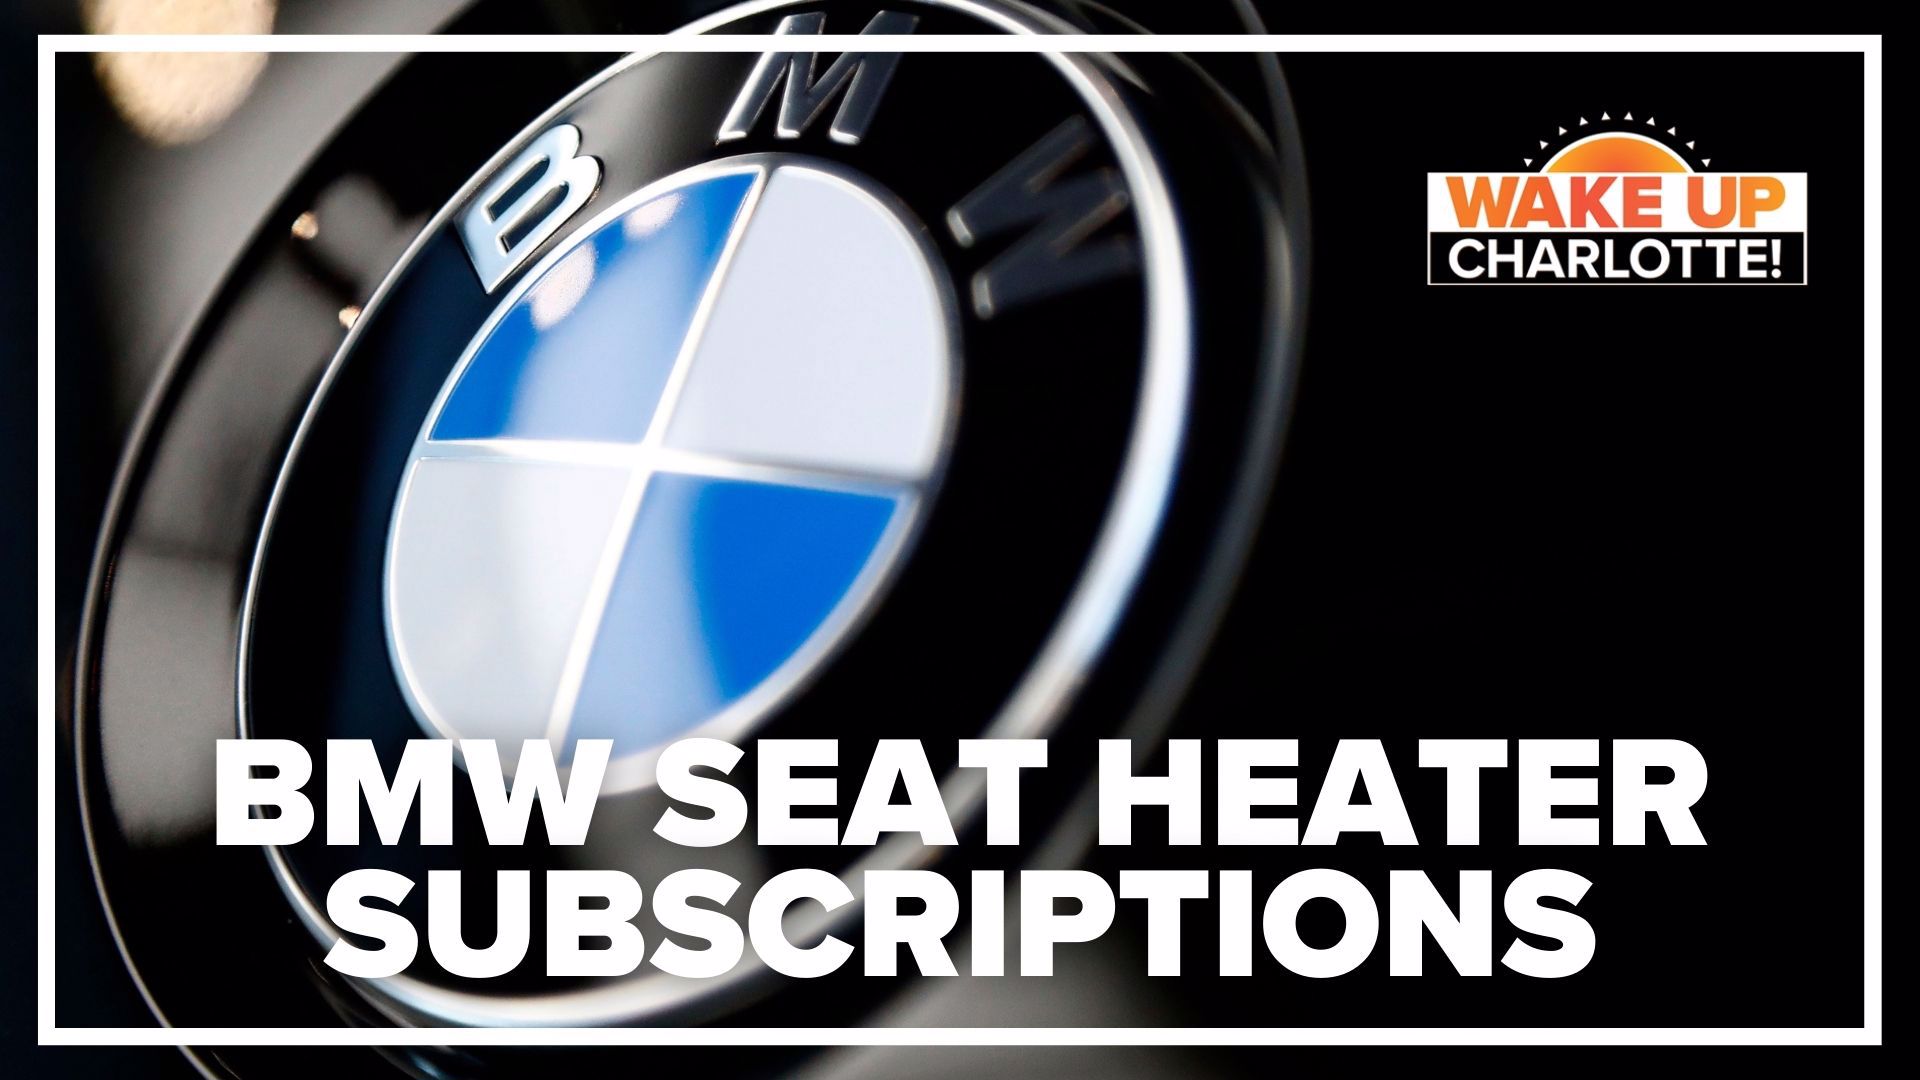 BMW is selling an $18 monthly subscription for customers to use the heated seats installed in their vehicles.